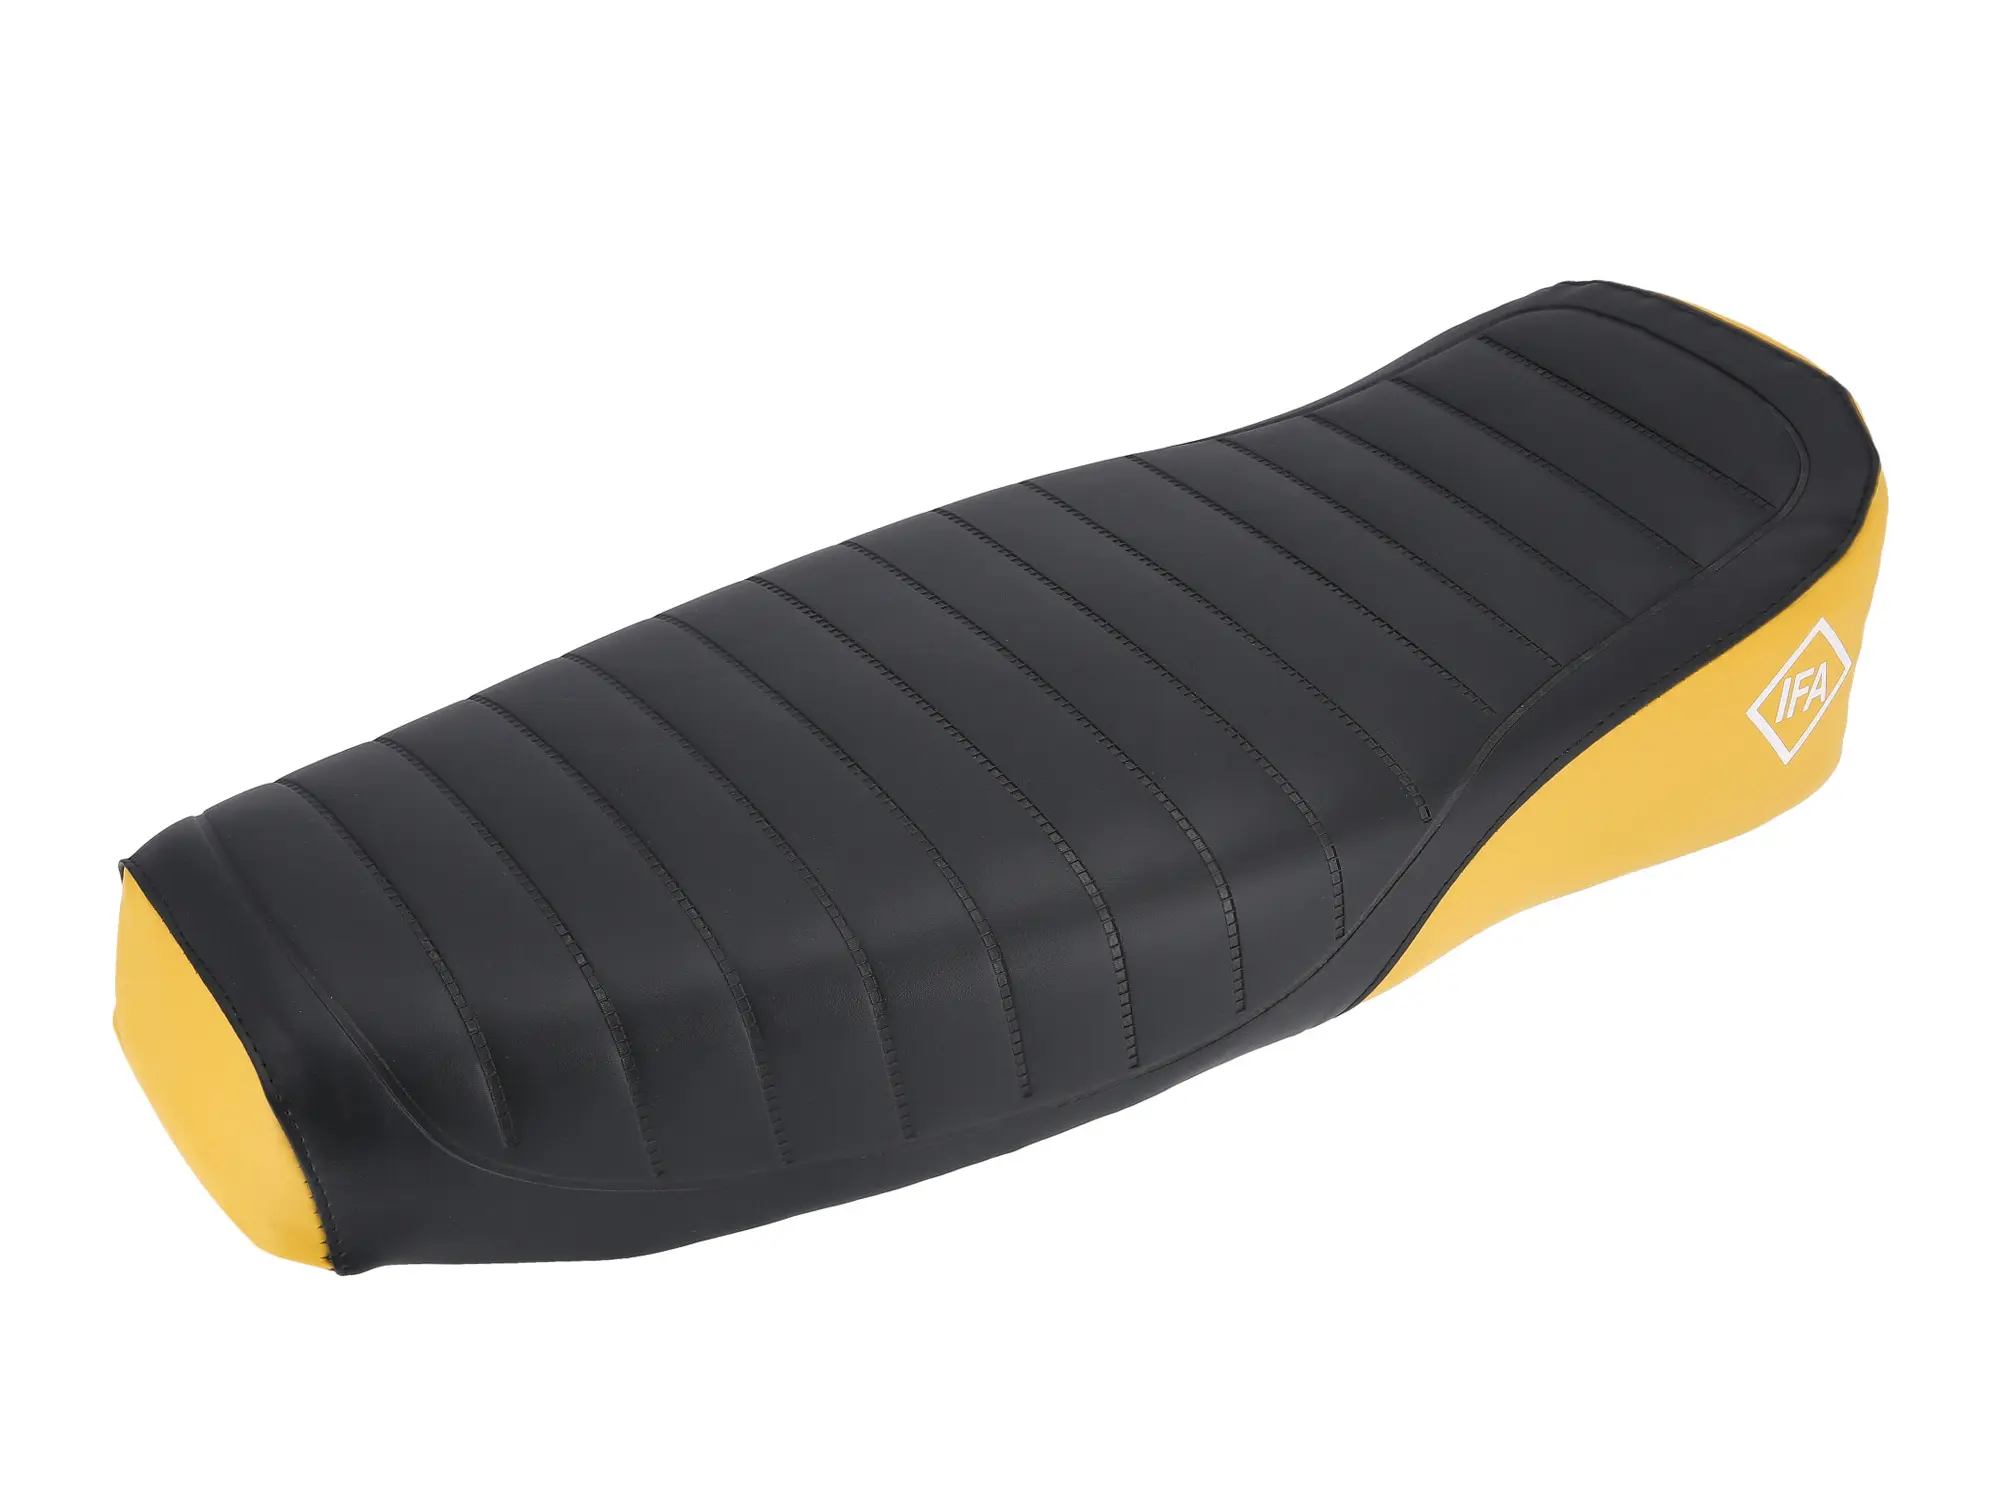 Bench structured, black/yellow with SIMSON lettering - Simson S50, S51, S70 Enduro, Item no: 10001392 - Image 1